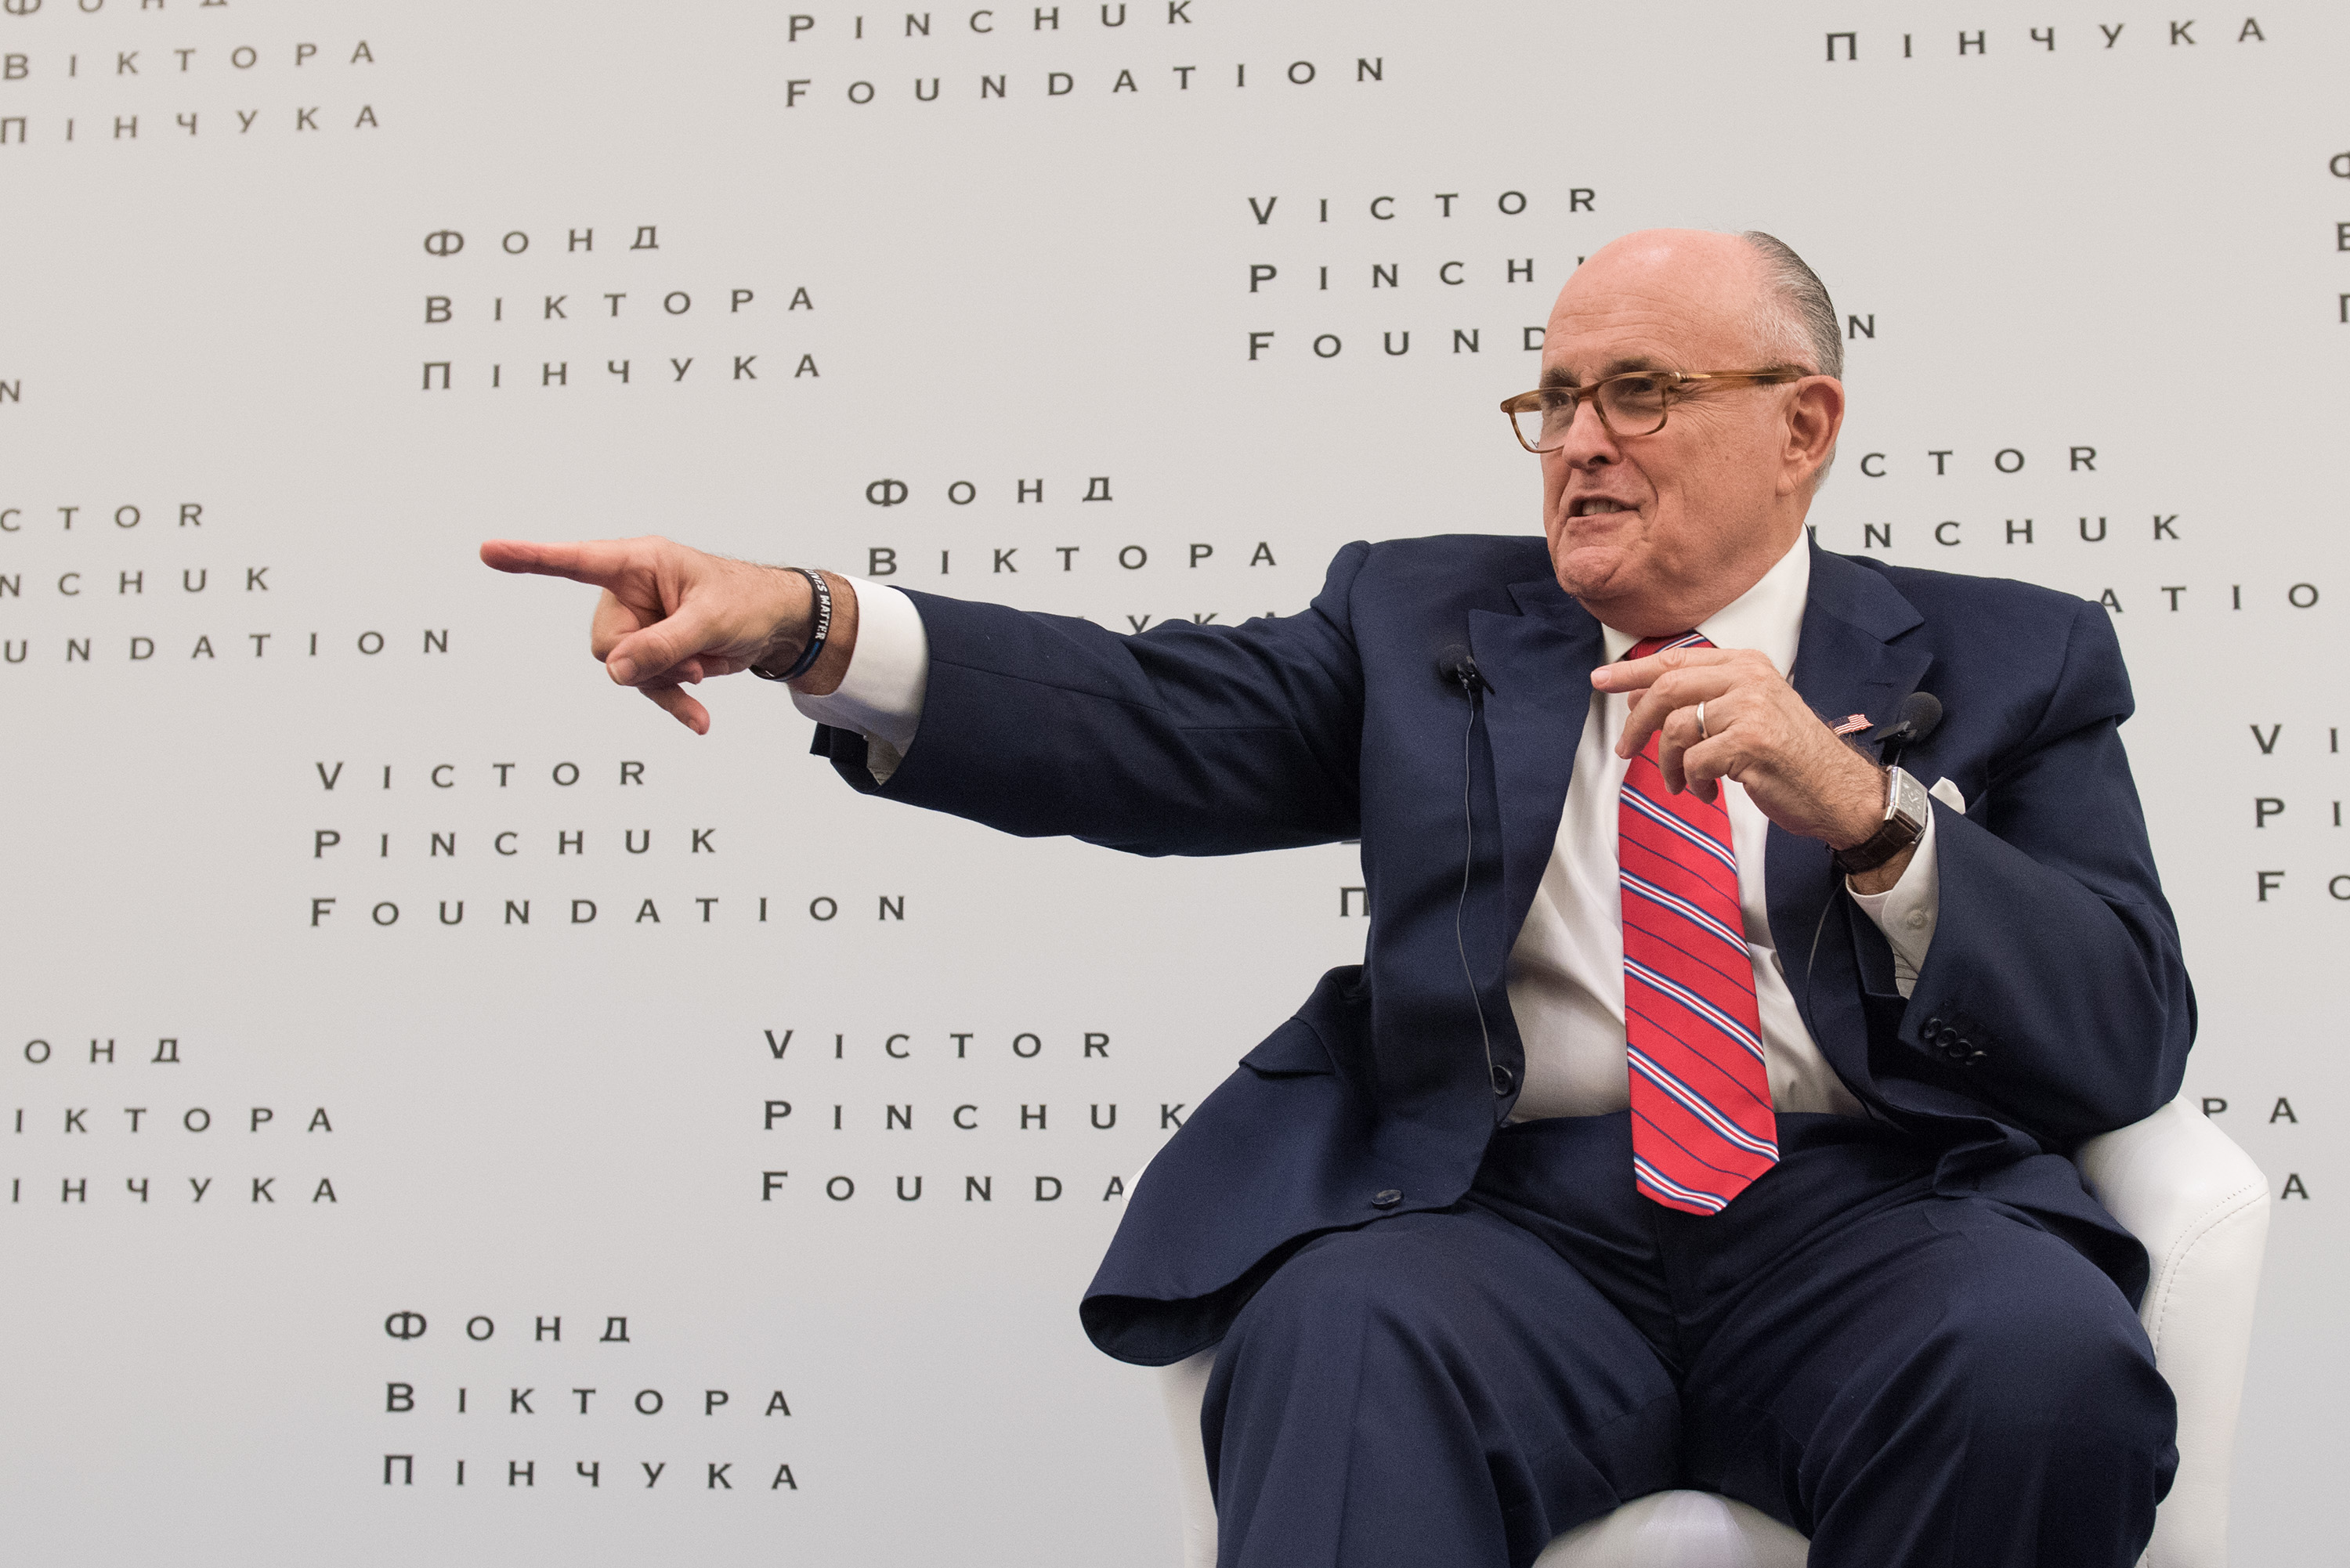 Public lecture by Rudy Giuliani